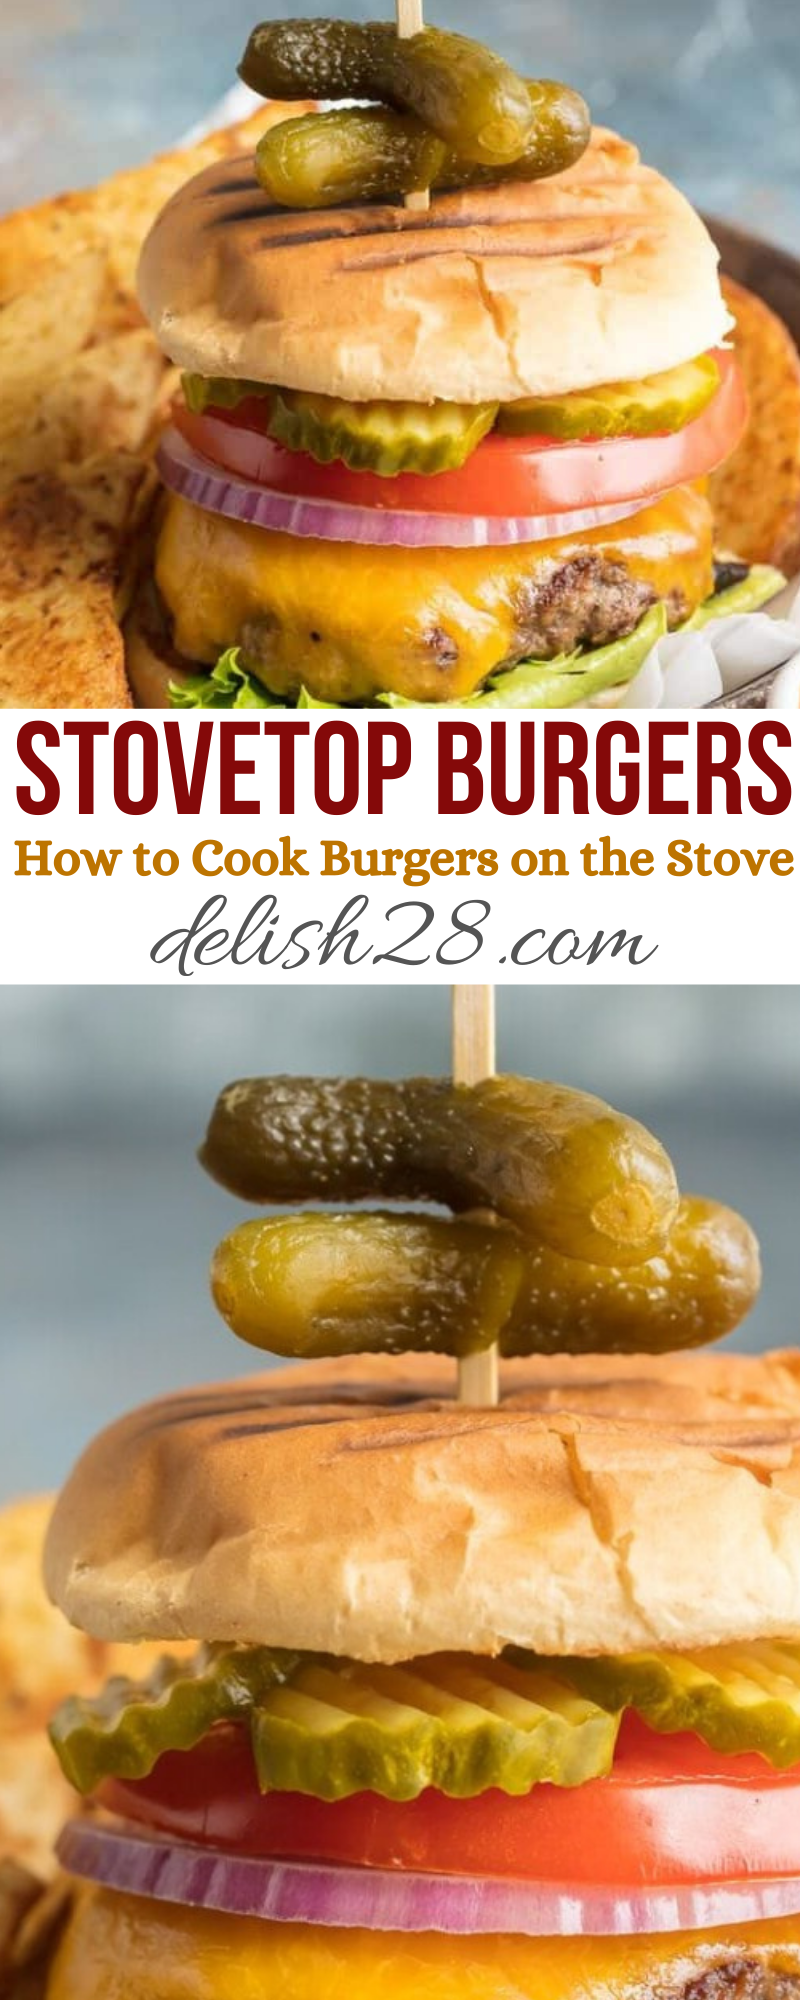 STOVETOP BURGERS - HOW TO COOK BURGER ON THE STOVE - delish28